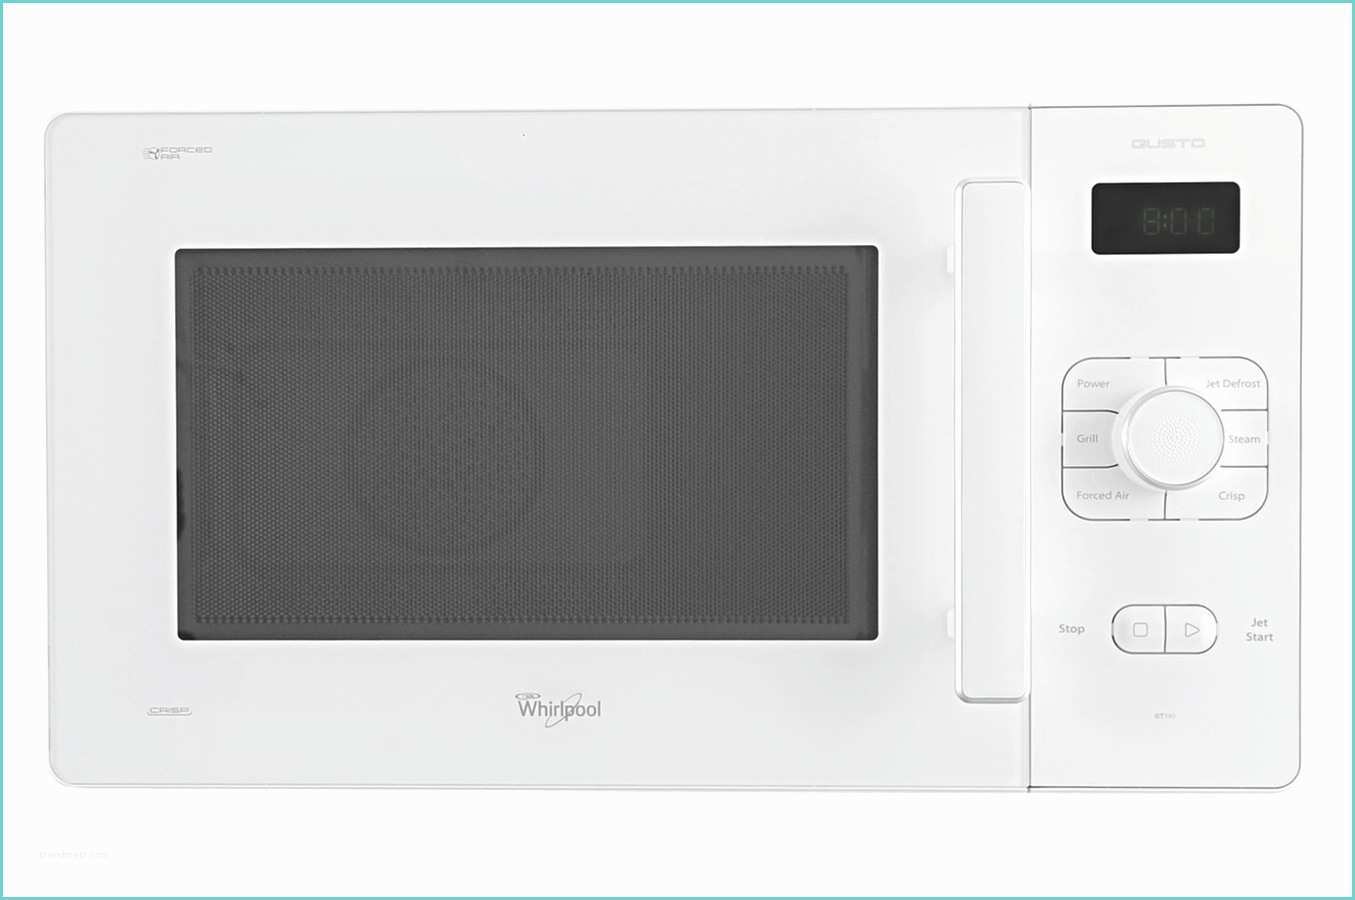 Micro Ondes Combine Whirlpool Micro Ondes Biné Whirlpool Gt390wh